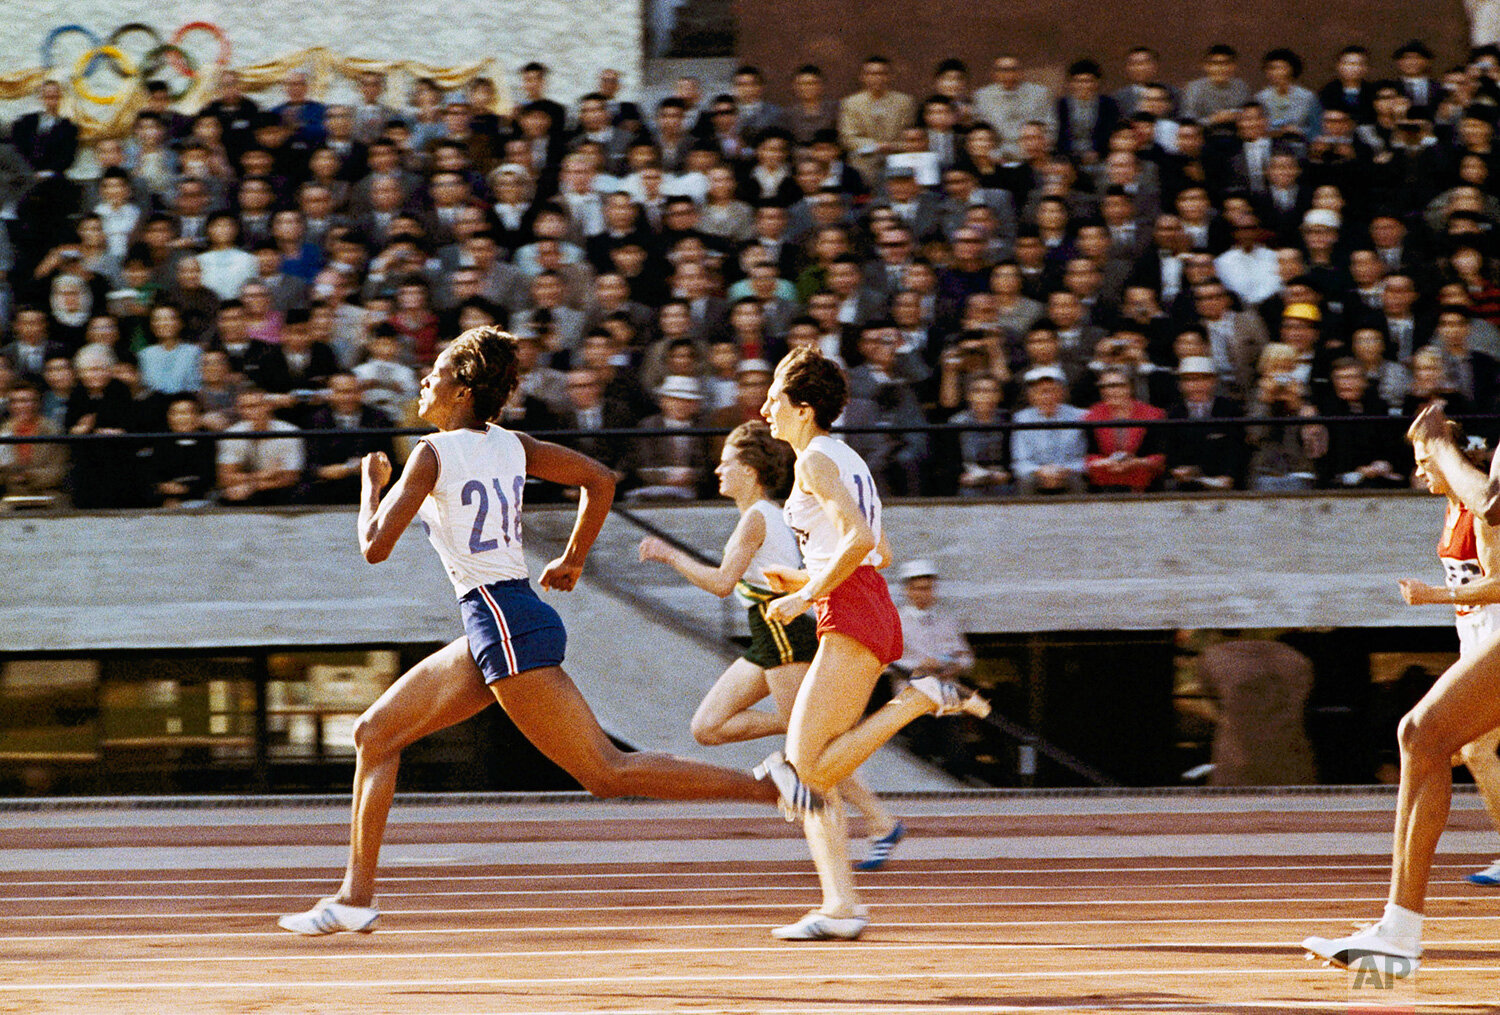  Edith McGuire, left, leads the women's 200 meter race at the 1964 Summer Olympics in Tokyo.  Second is Irena Kirszenstein and third is Marilyn Black in red shorts. (AP Photo) 